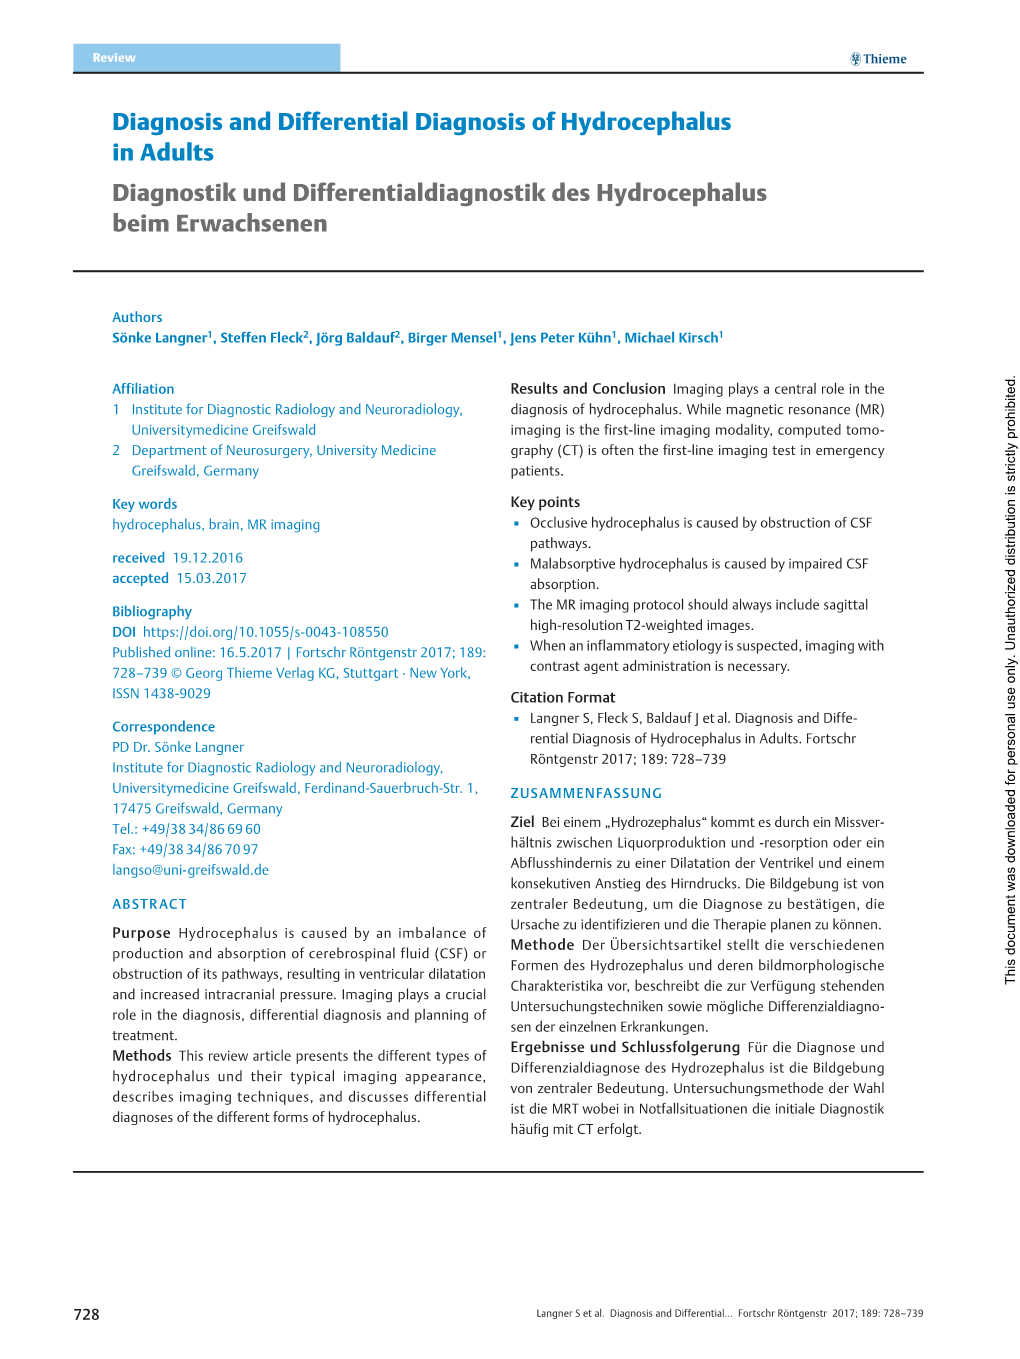 Diagnosis and Differential Diagnosis of Hydrocephalus in Adults Diagnostik Und Differentialdiagnostik Des Hydrocephalus Beim Erwachsenen